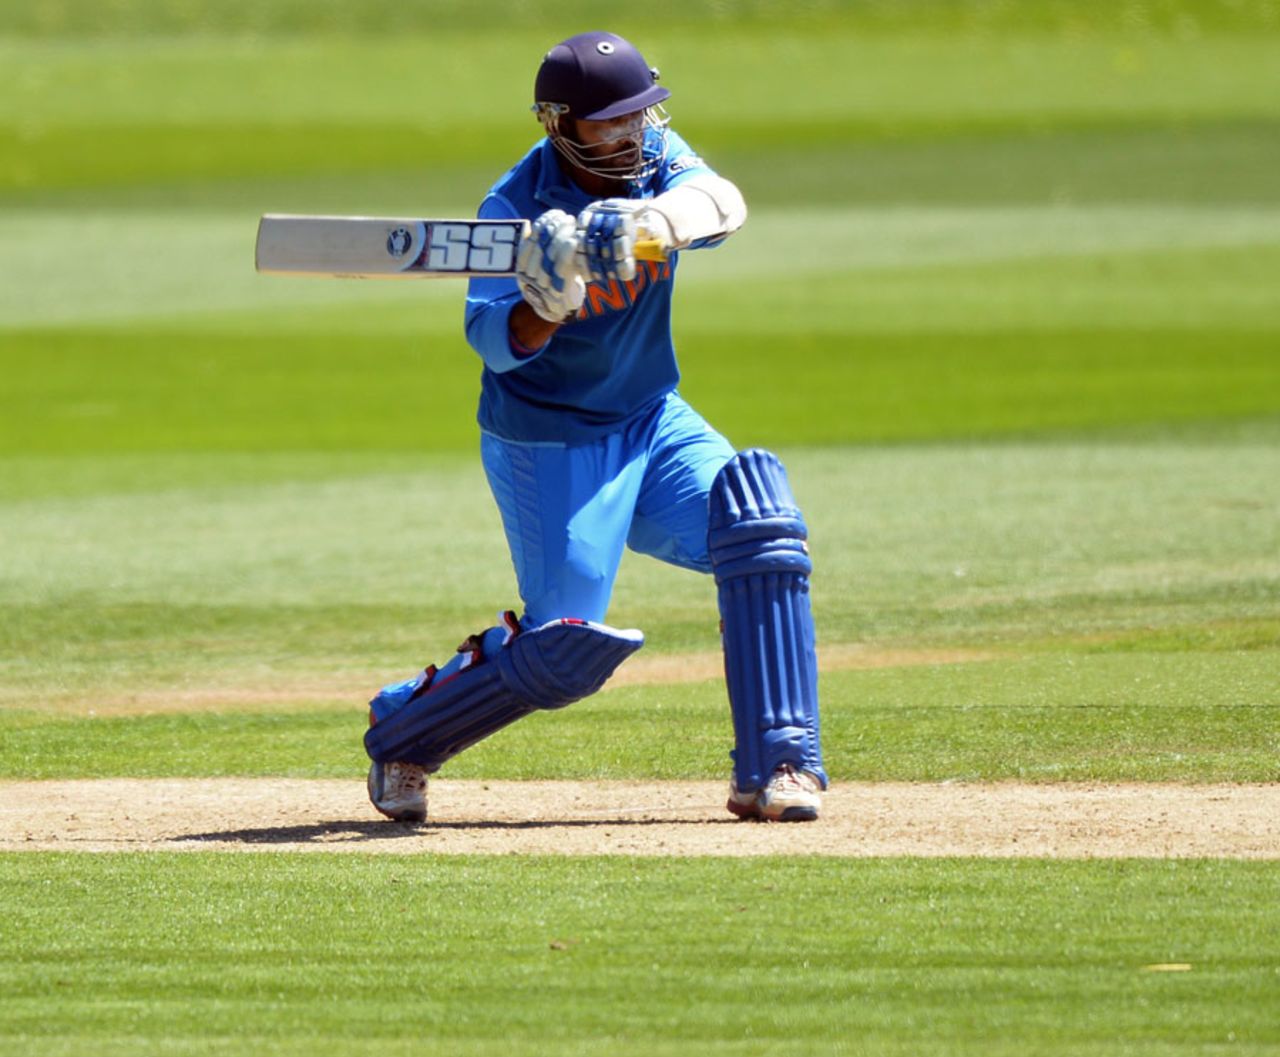 Dinesh Karthik gets in position to play a cut shot, India v Australia, Champions Trophy warm-up, Cardiff, June 4, 2013